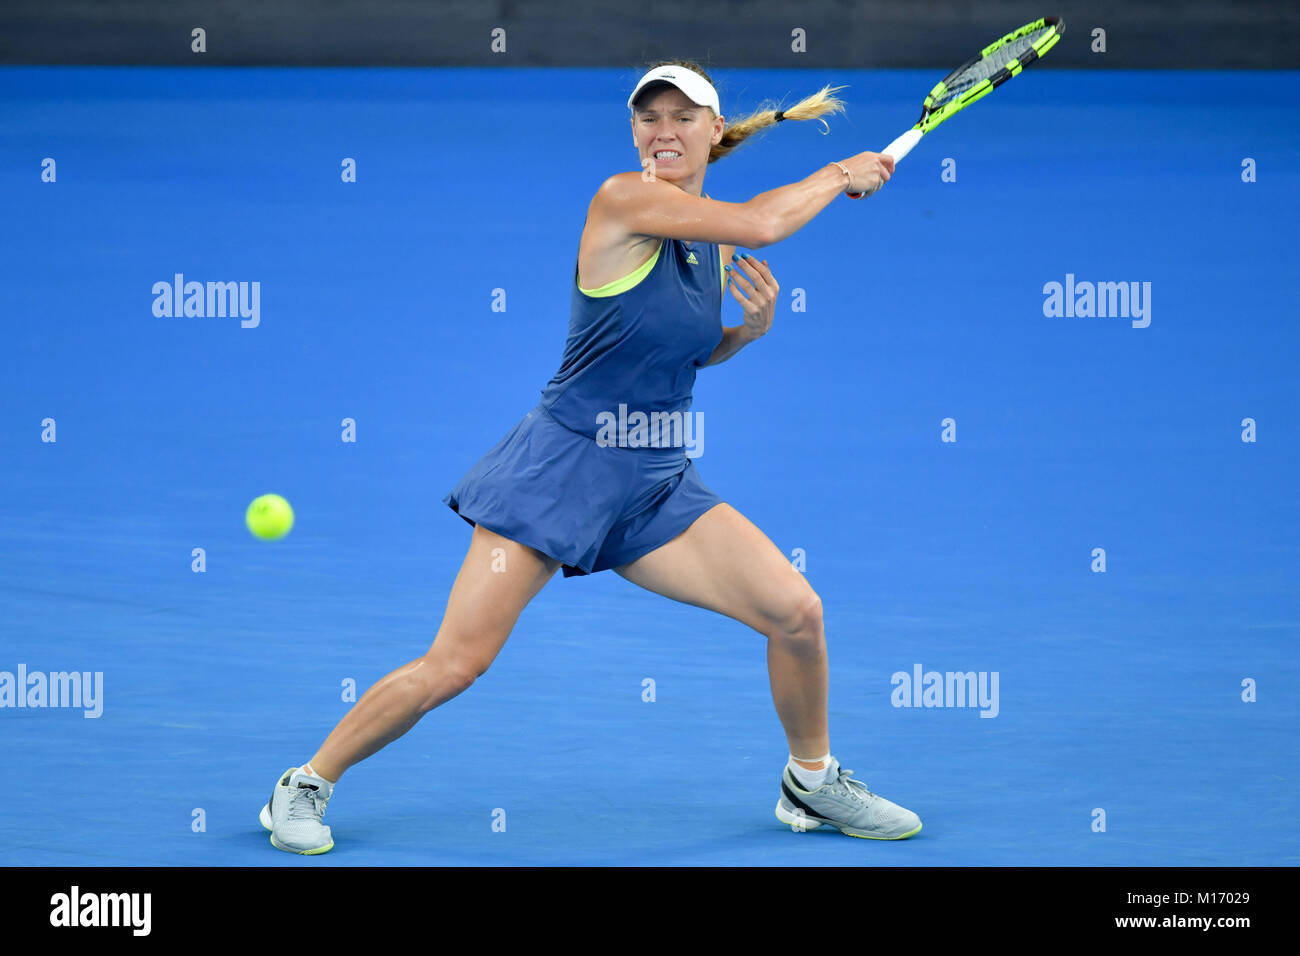 Melbourne, Australia. 27th Jan, 2018. Number two seed Caroline Wozniacki of Denmark in action in the Women's Final against number one seed Simona Halep of Romania on day thirteen of the 2018 Australian Open Grand Slam tennis tournament in Melbourne, Australia. Sydney Low/Cal Sport Media/Alamy Live News Stock Photo